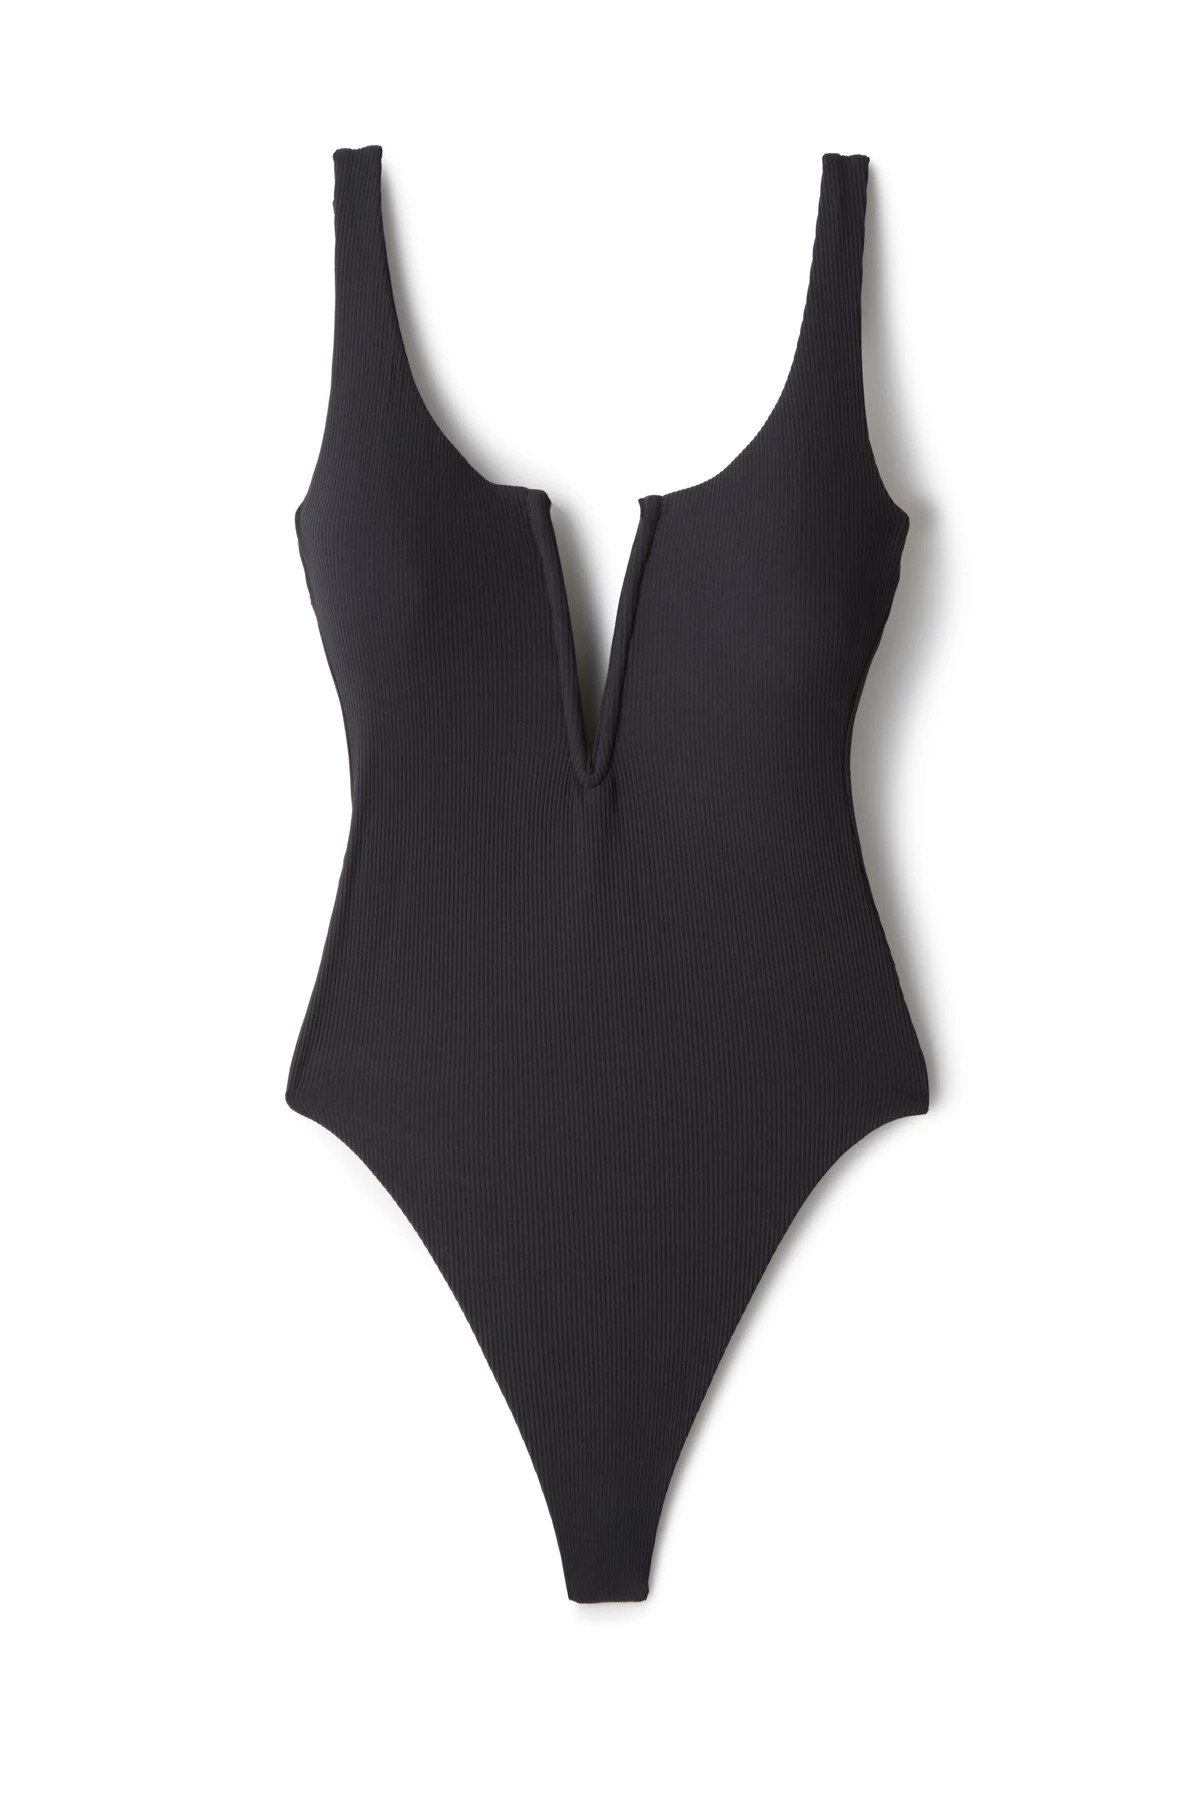 BLACK SAND Martinique One Piece Swimsuit image number 3